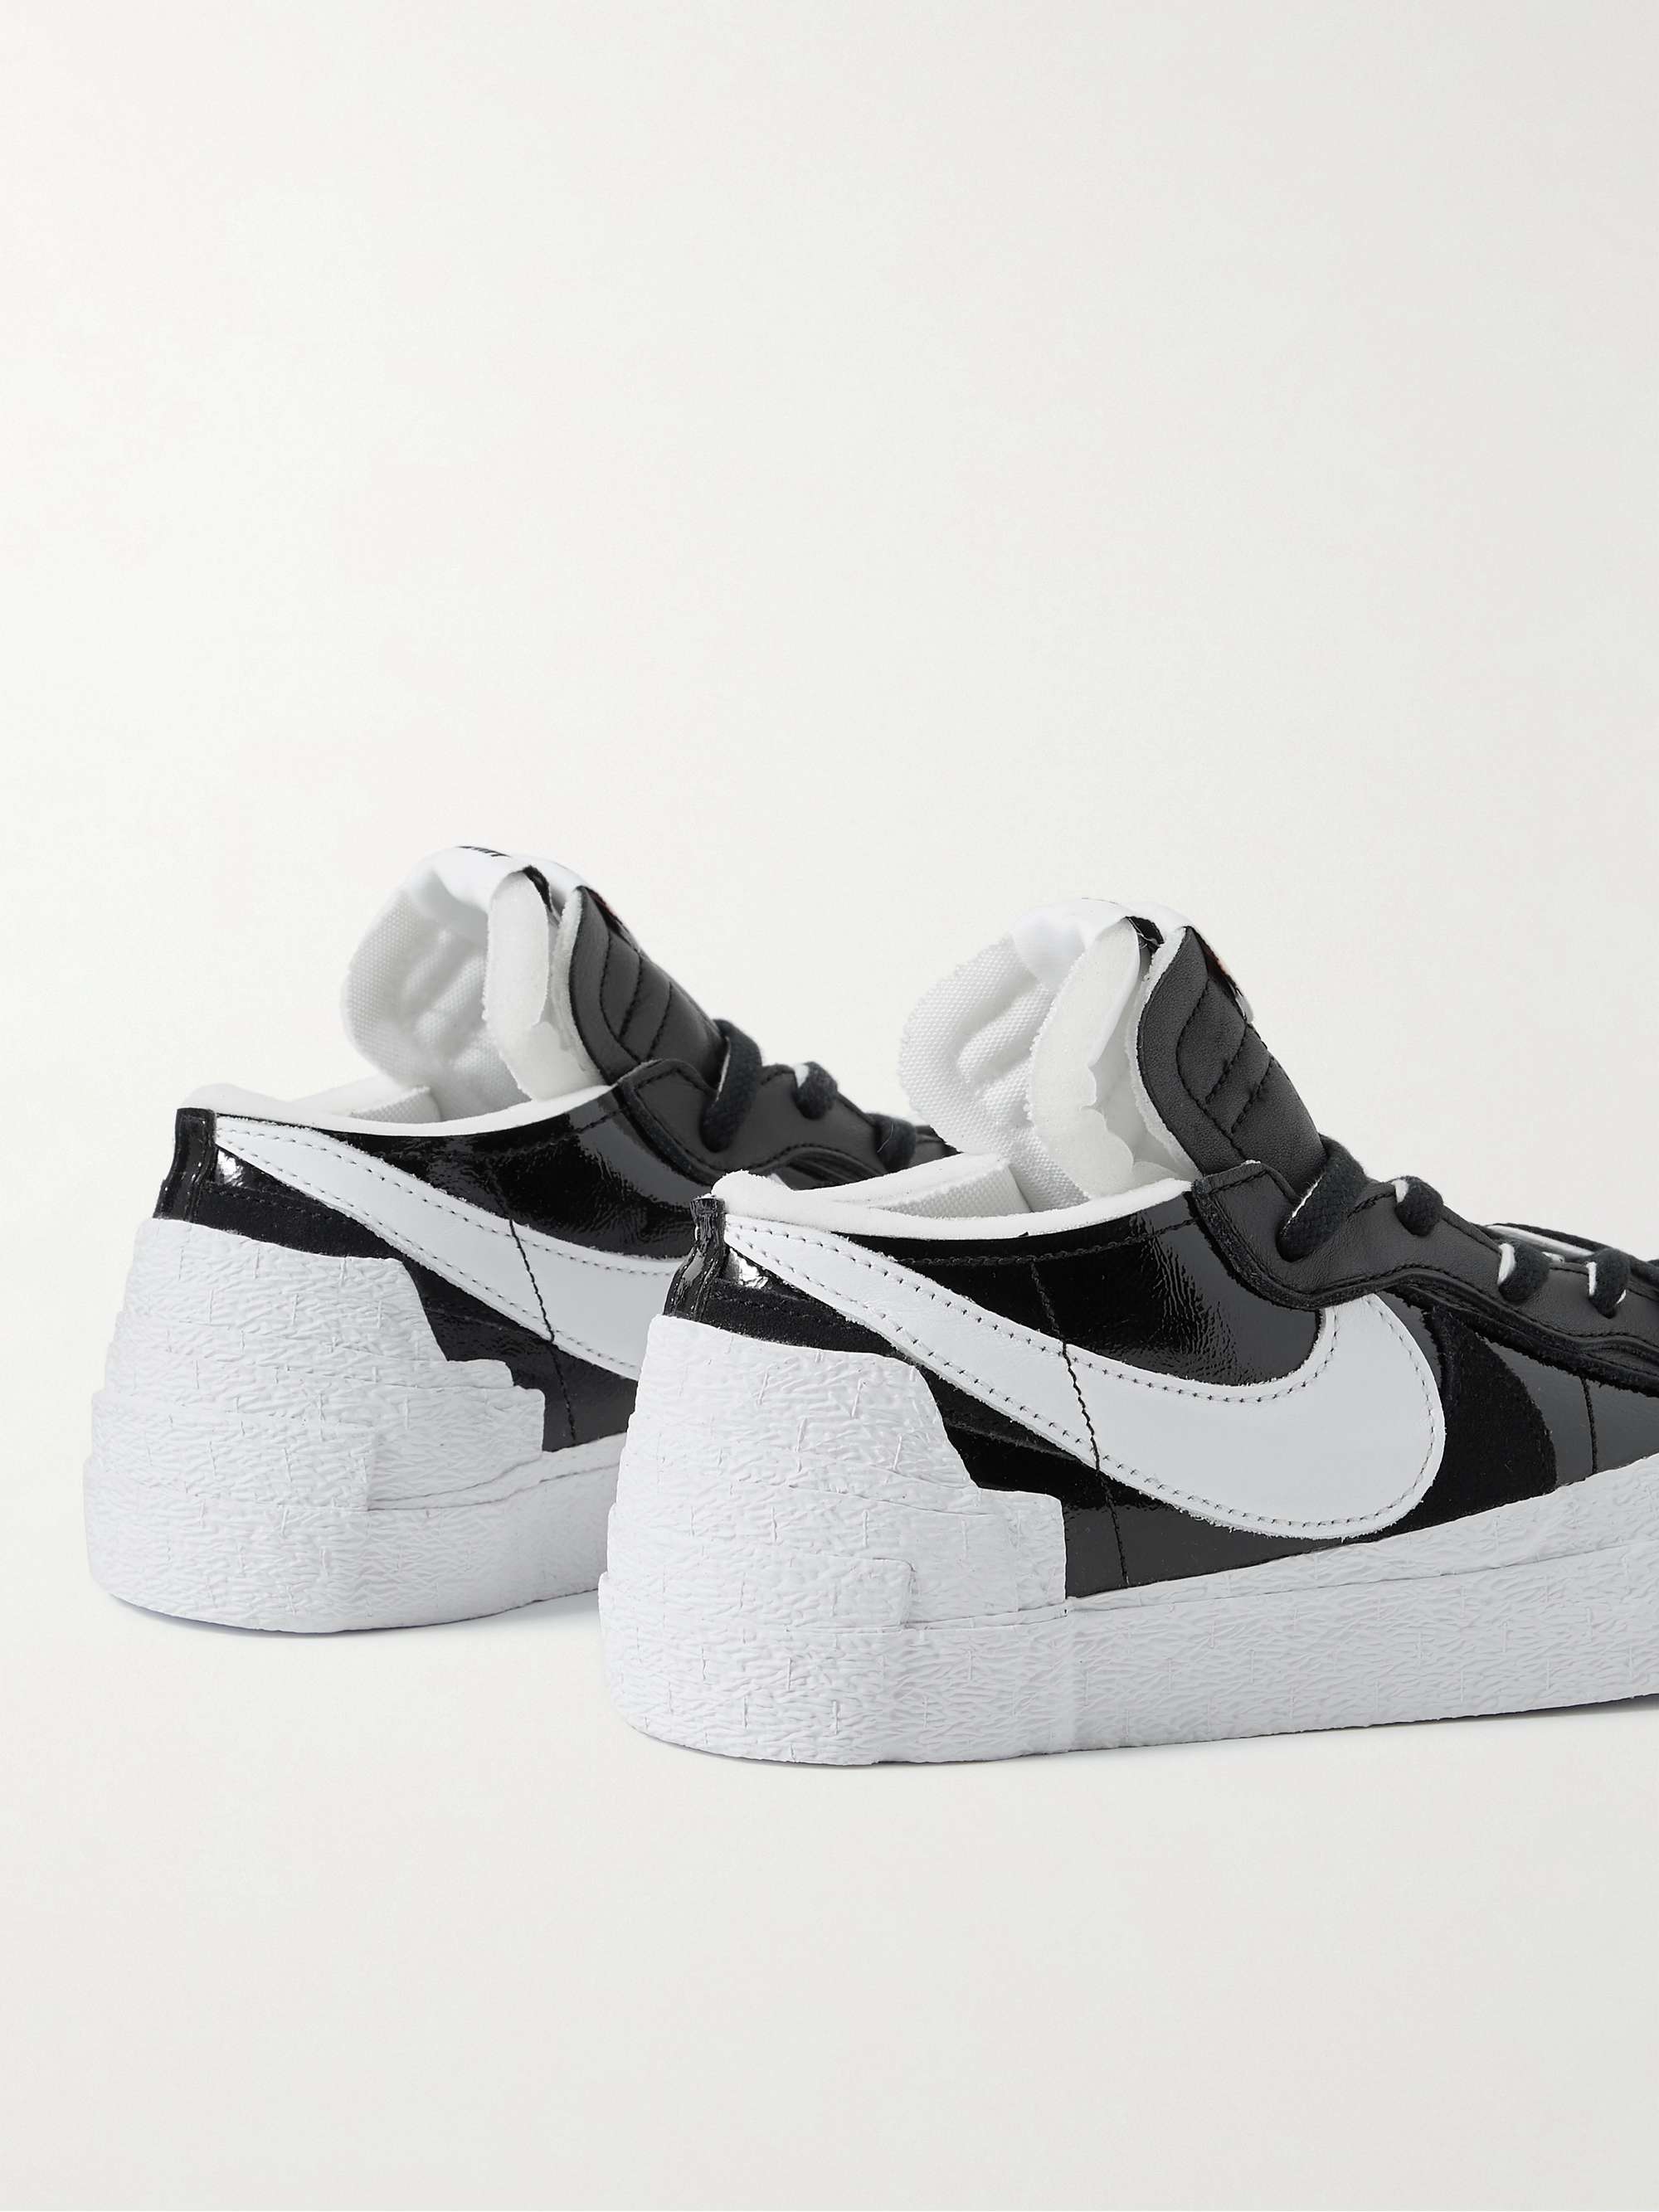 + Sacai Blazer Low Suede-Trimmed Leather Sneakers